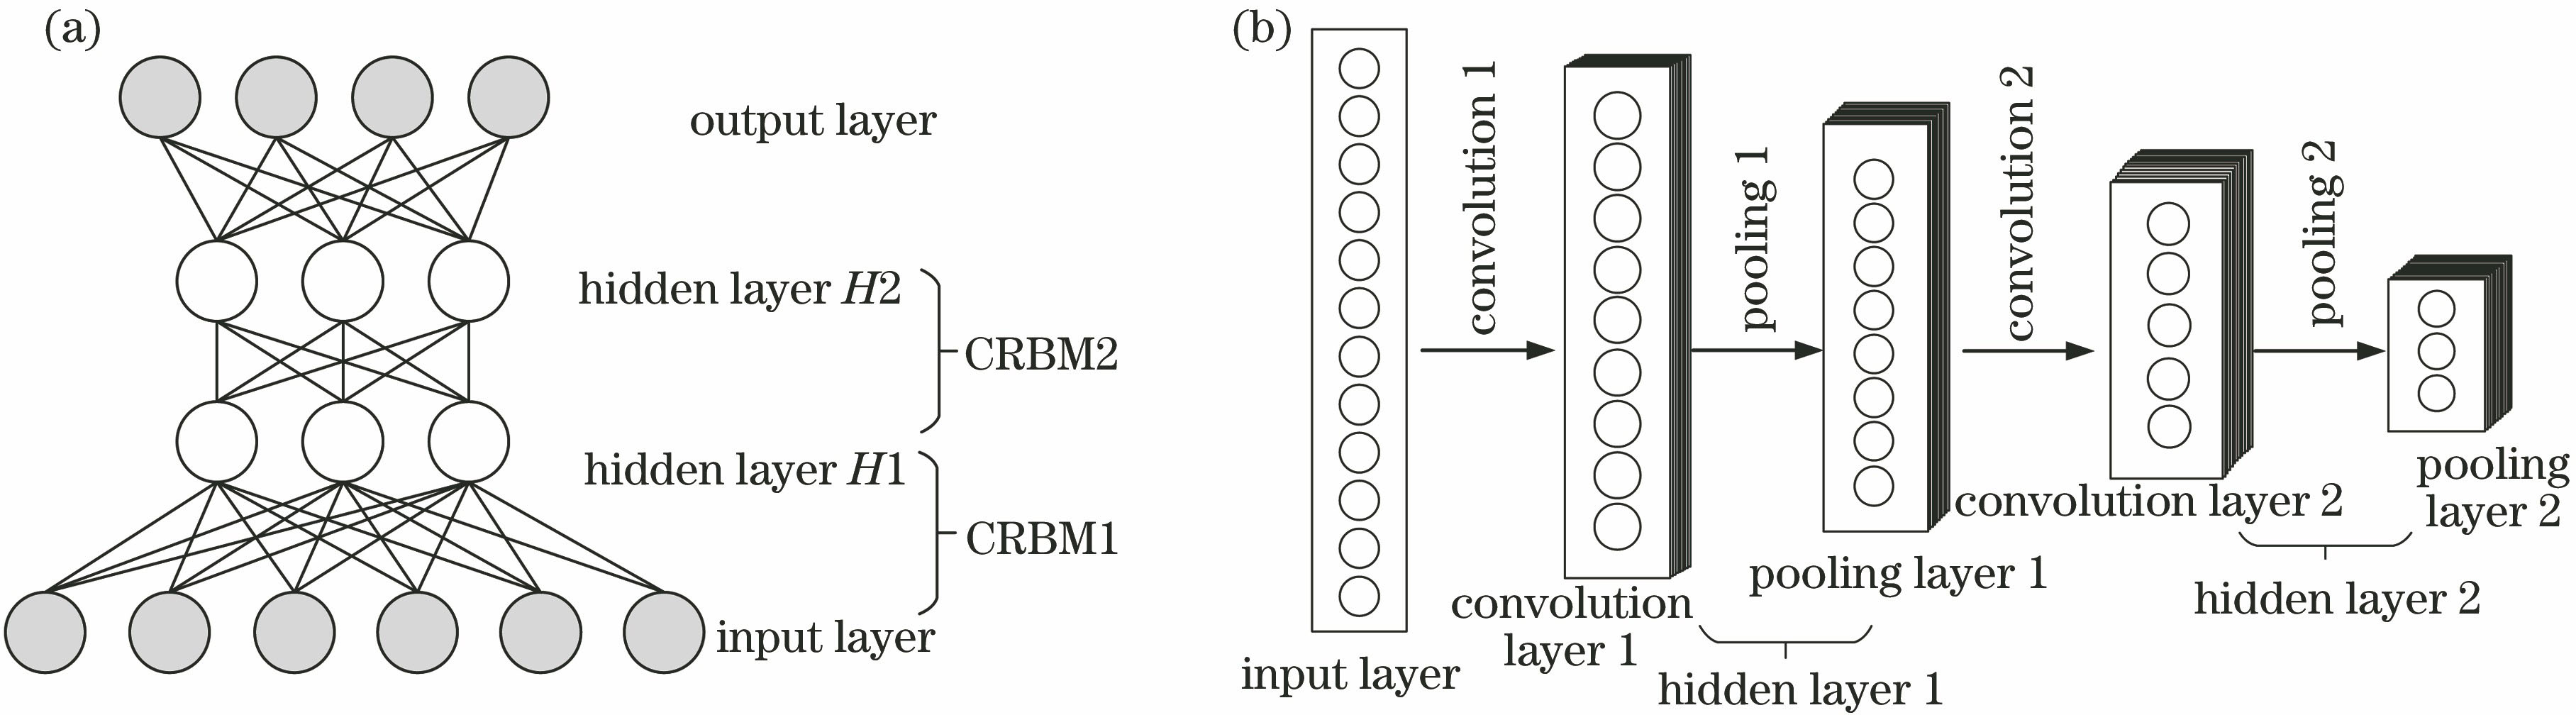 Different types of CDBN models structure. (a) General structure; (b) with pooling layer